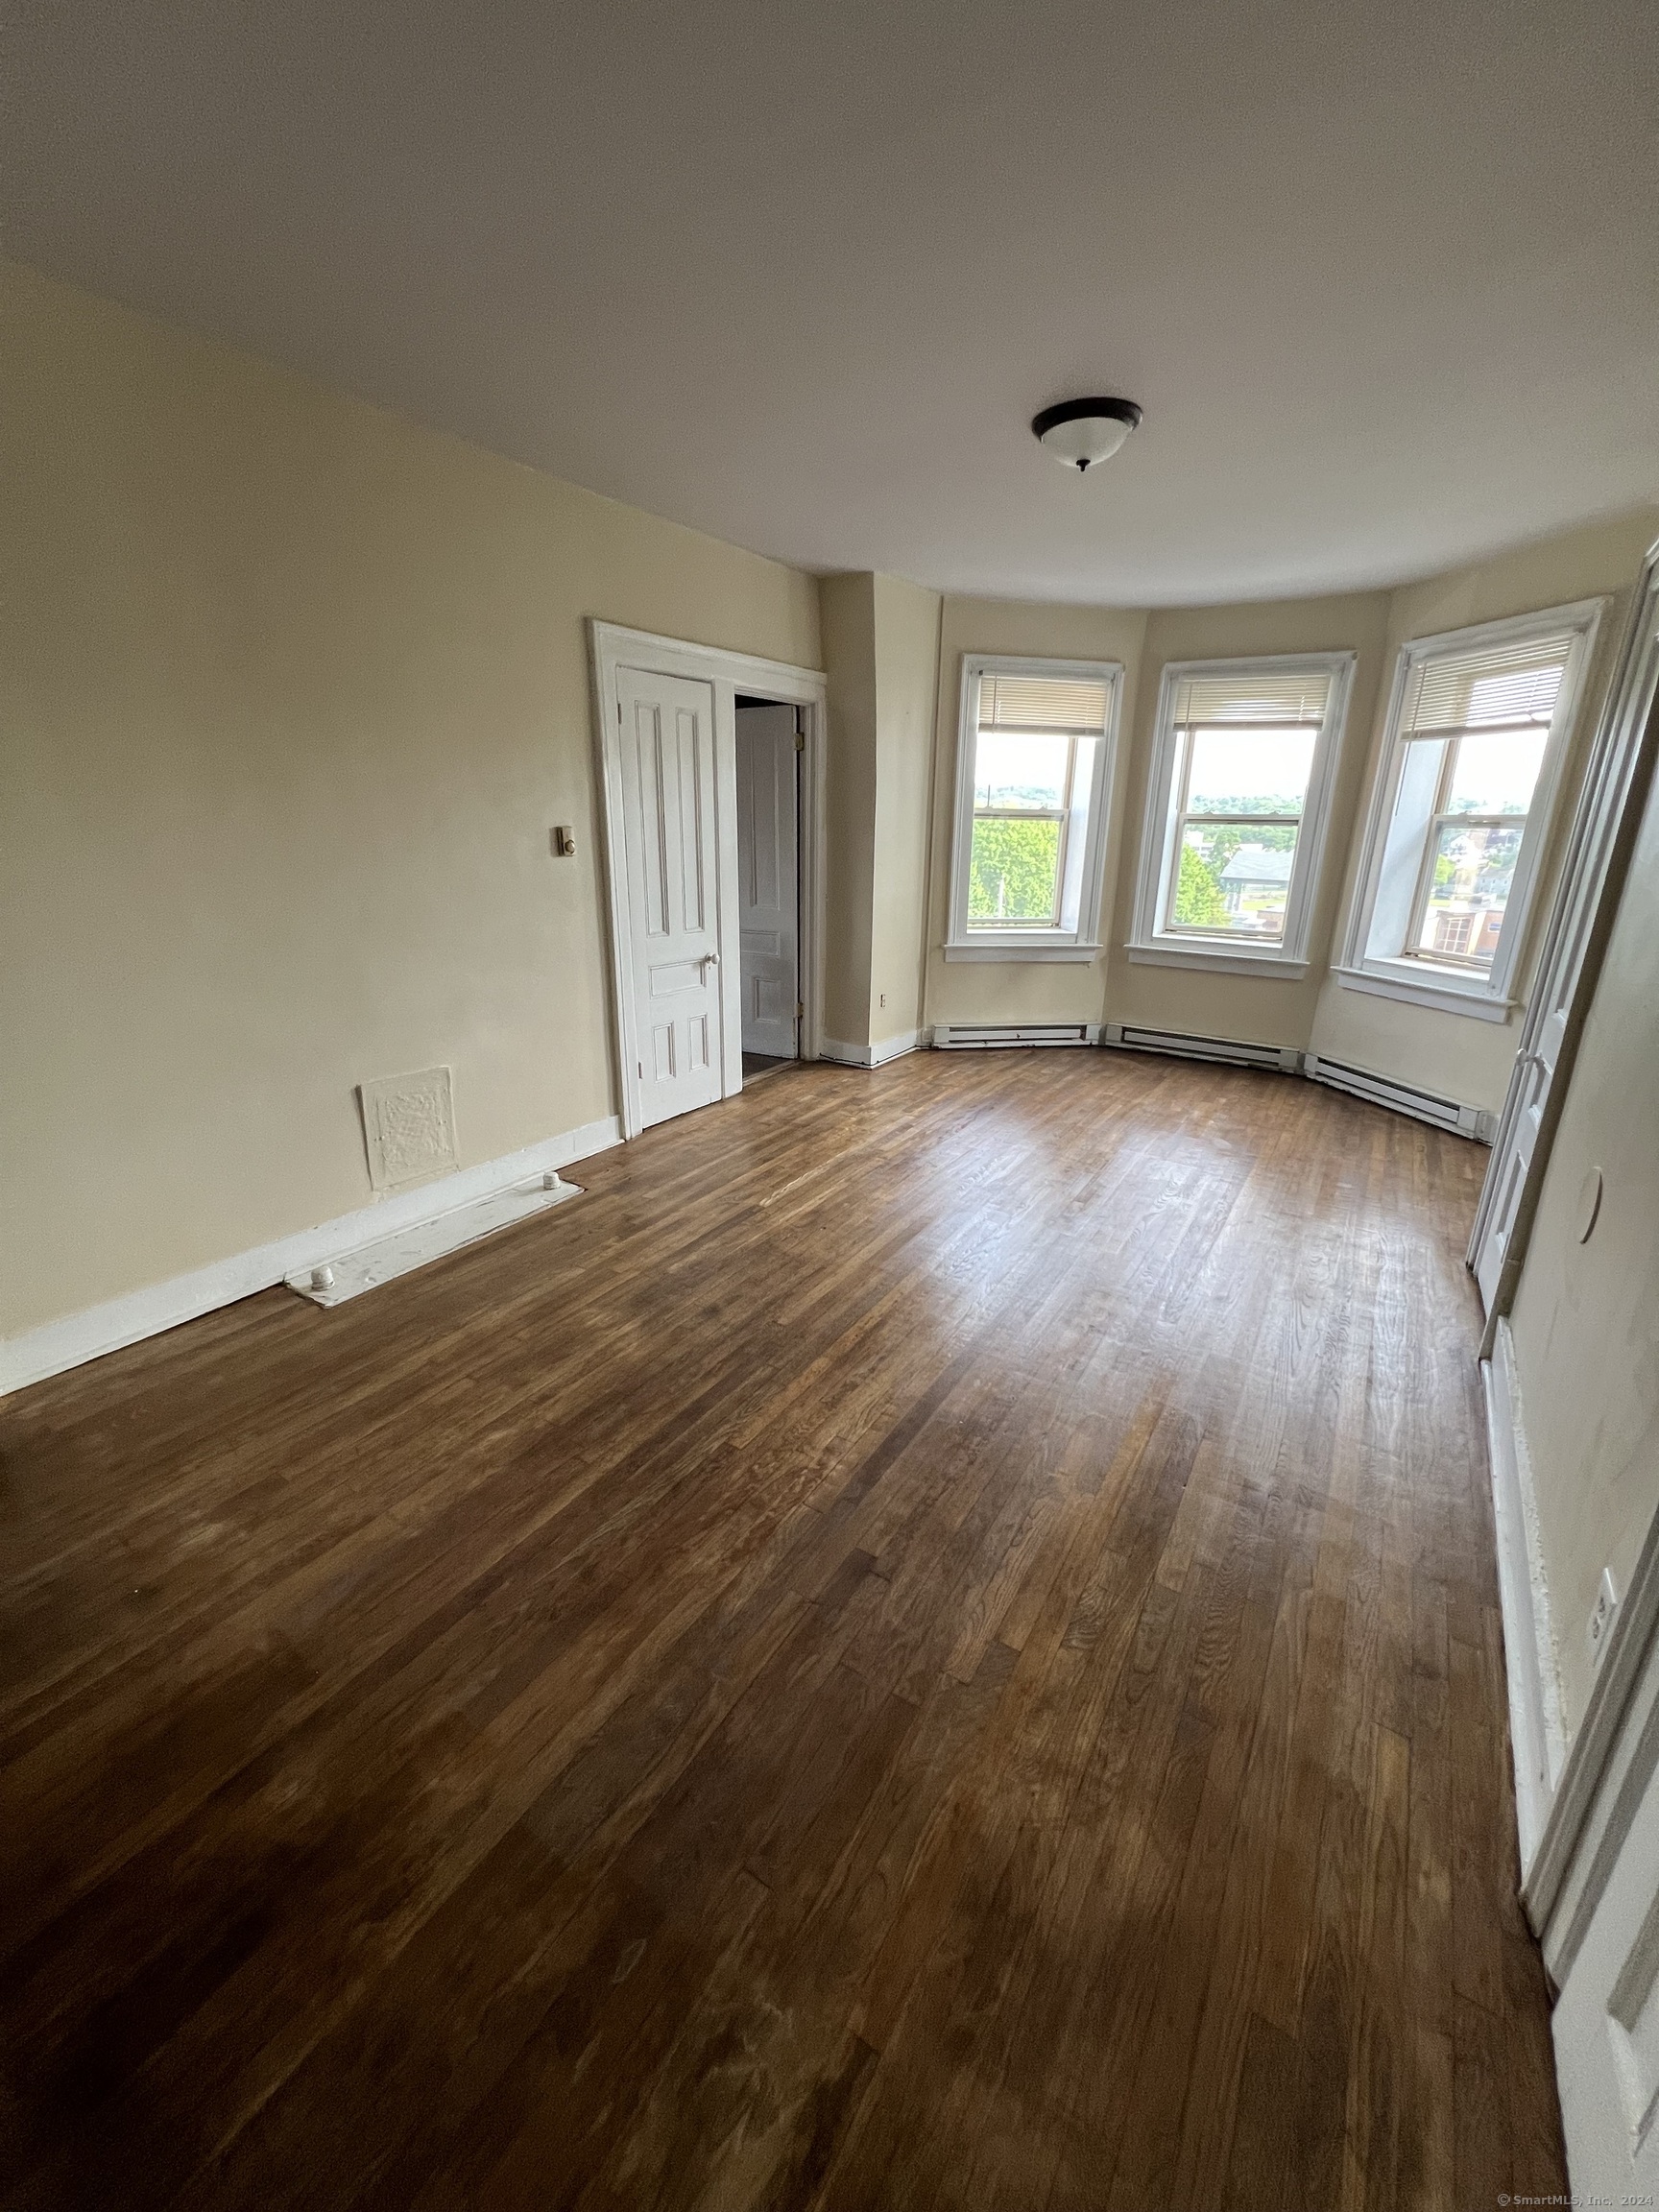 Rental Property at 14 Turner Street 1, Windham, Connecticut - Bedrooms: 3 
Bathrooms: 1 
Rooms: 6  - $1,750 MO.